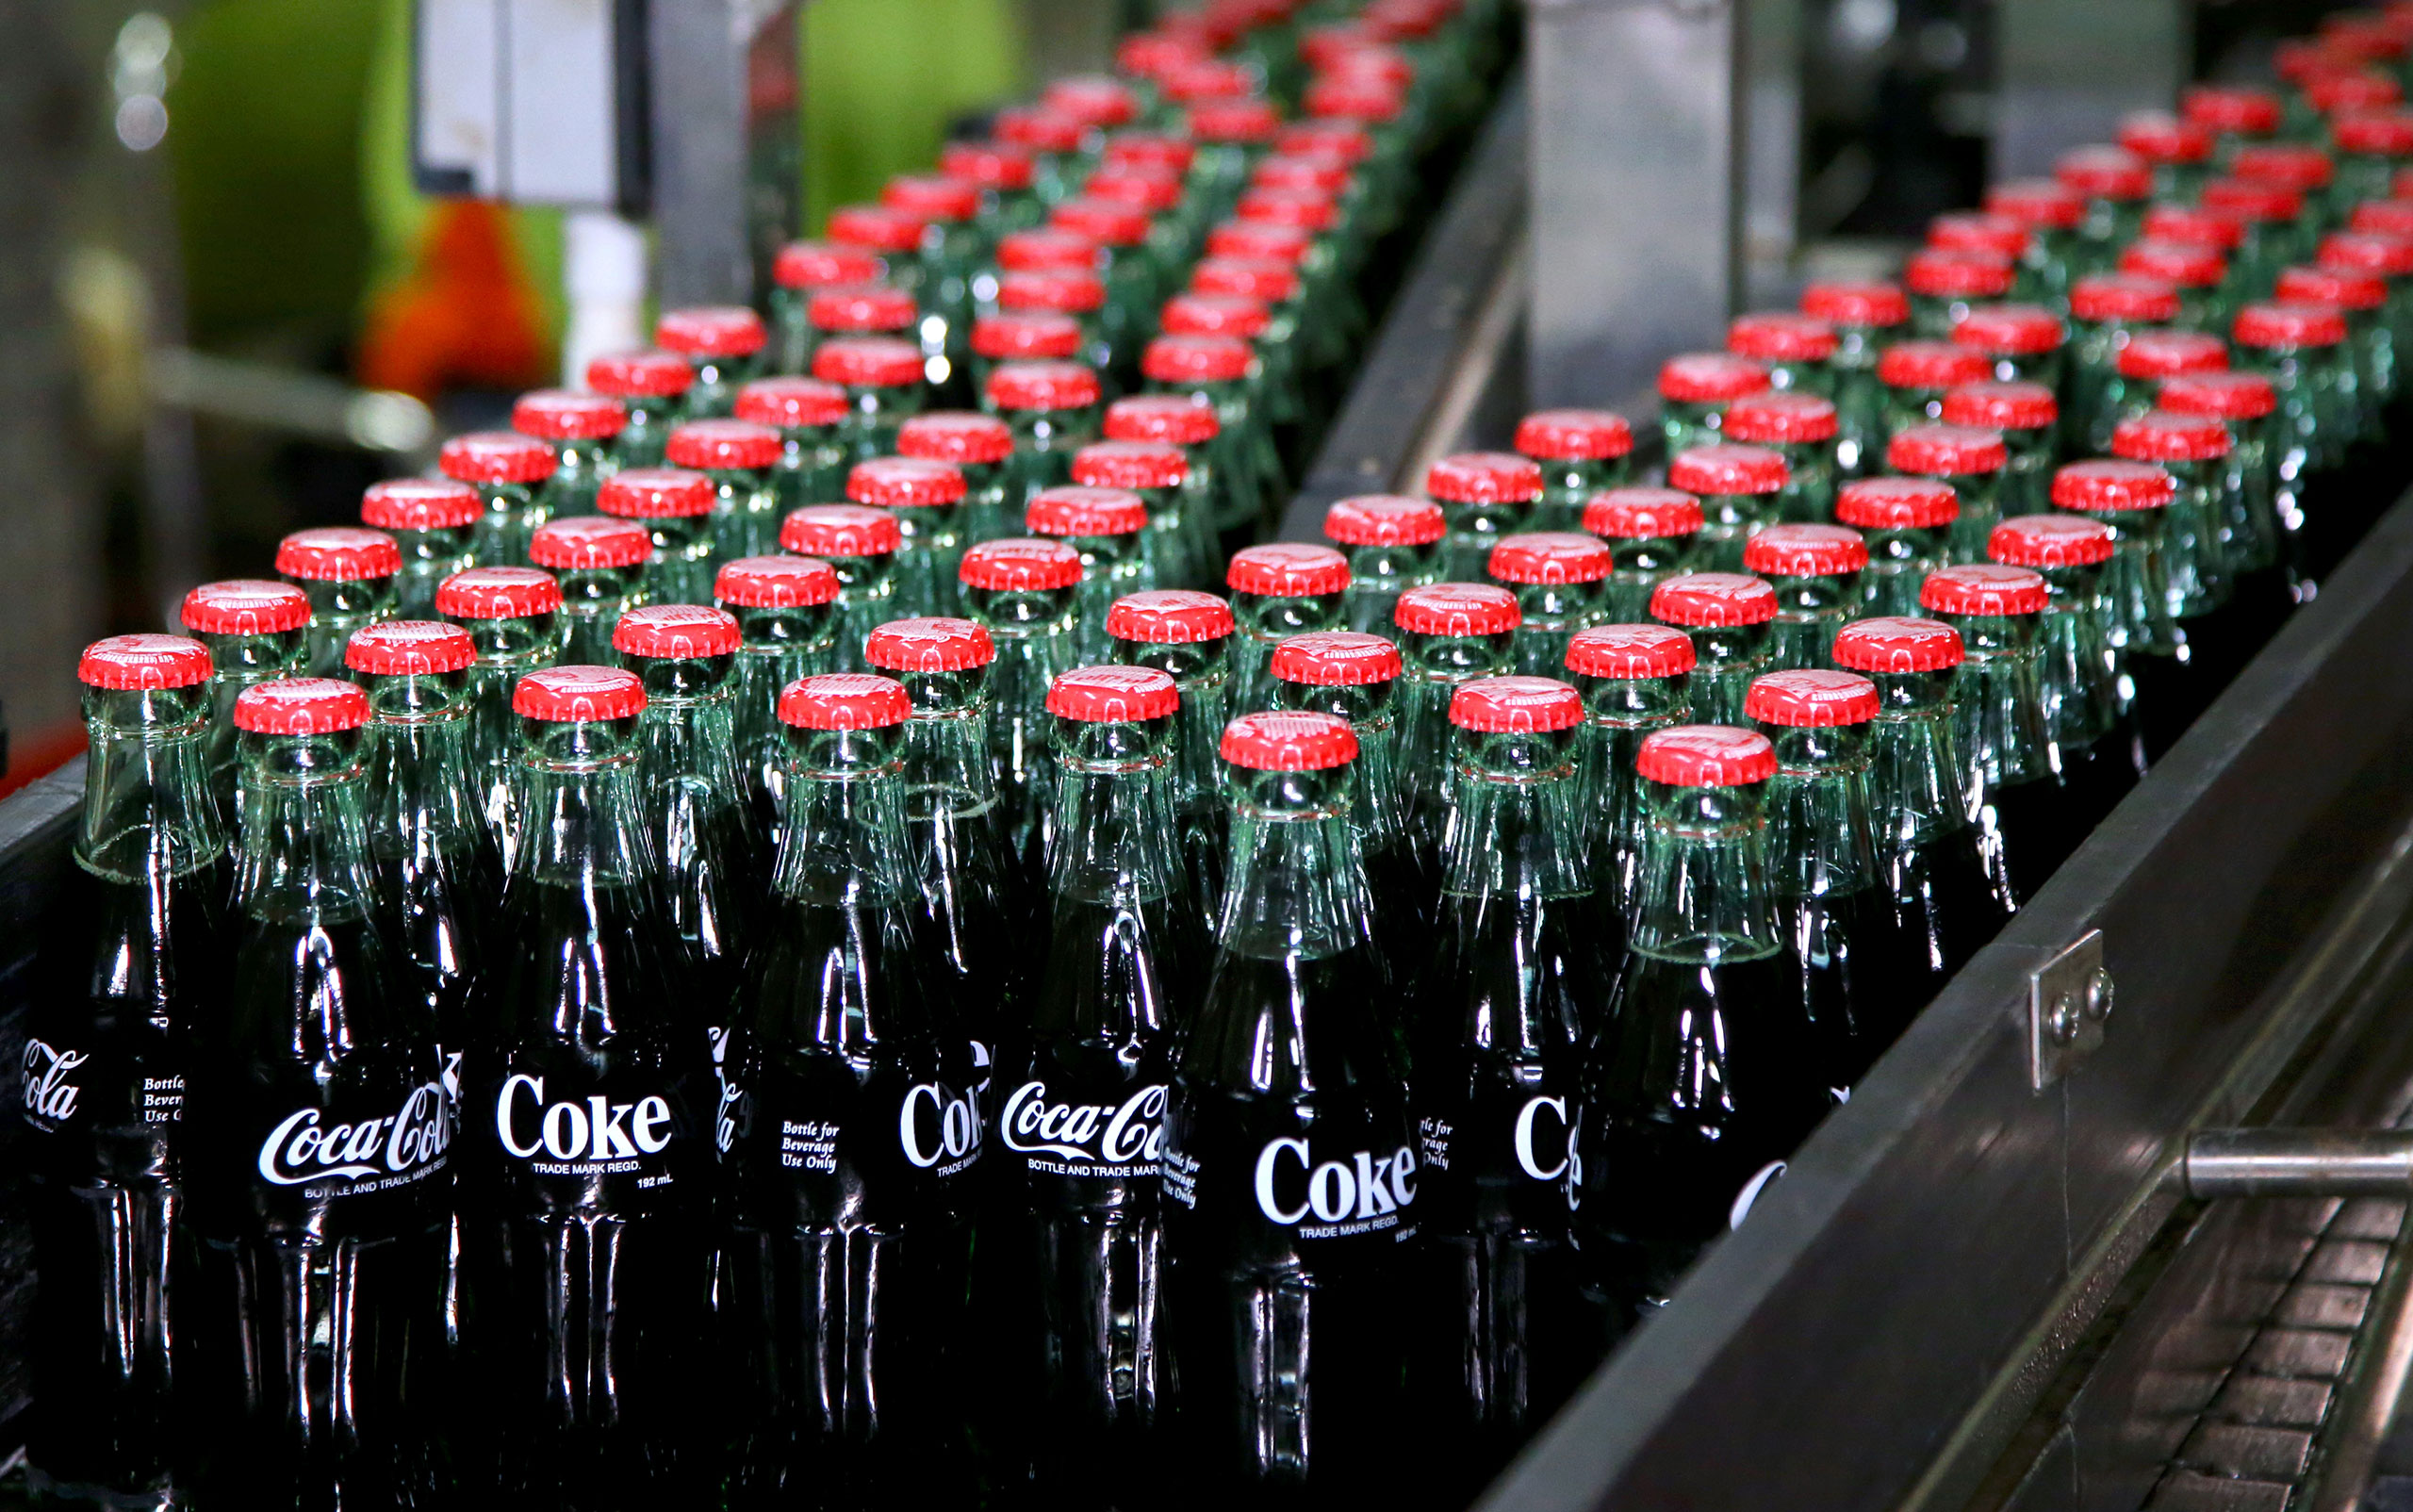 Swire Coca-Cola – Cooperating with suppliers